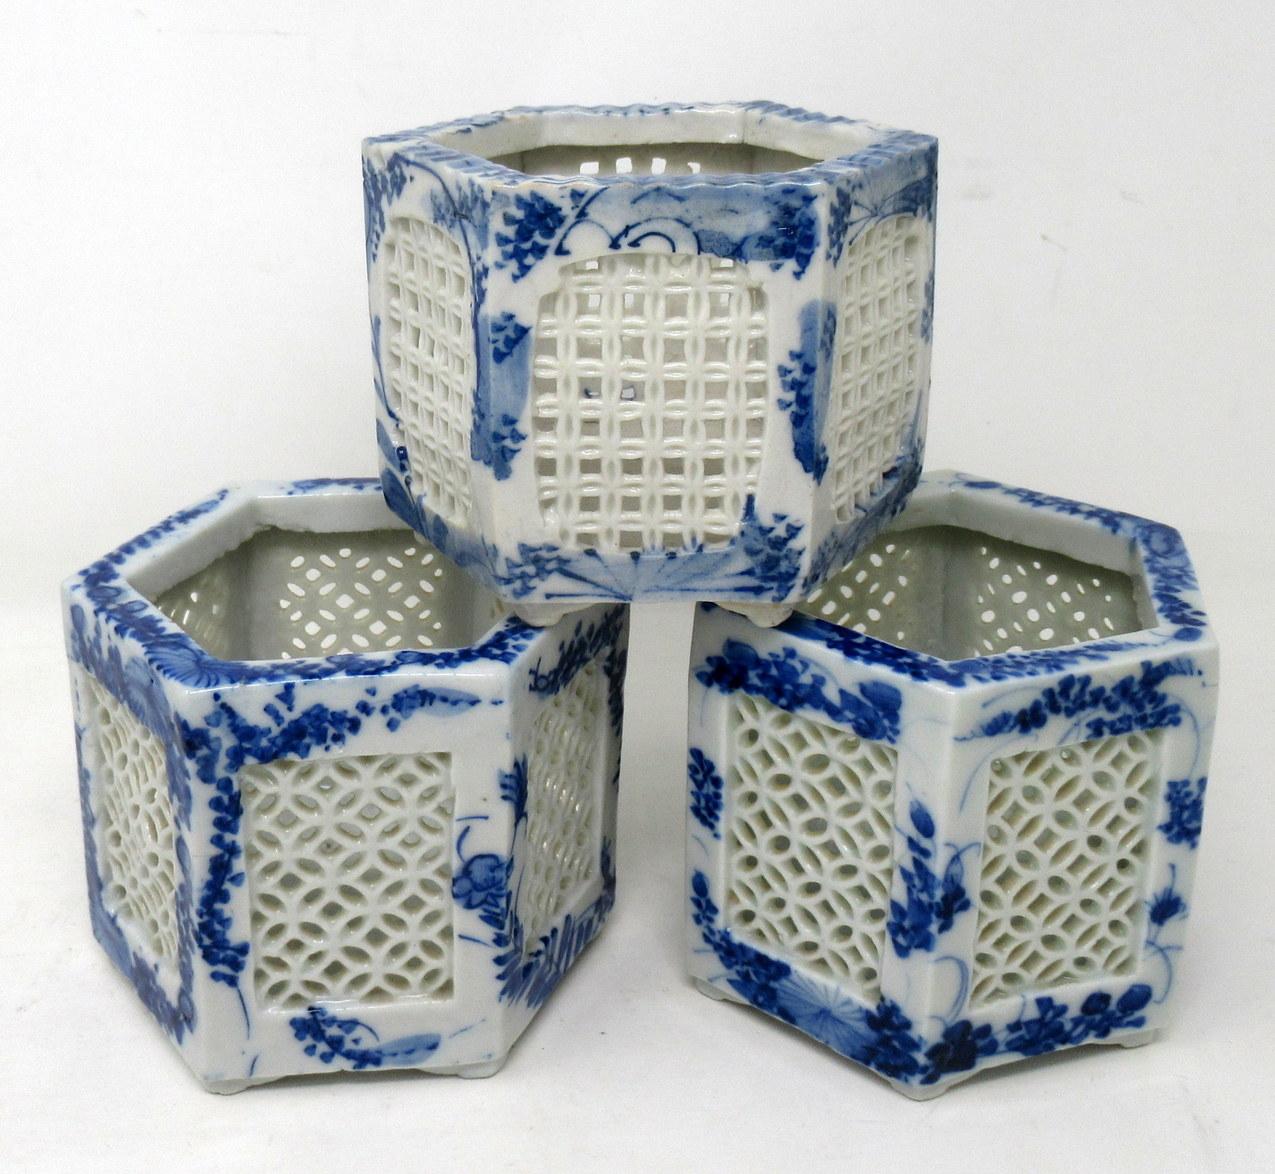 Hand Painted Blue White Japanese Chinese Reticulated Hexagonal Porcelain Vases 1